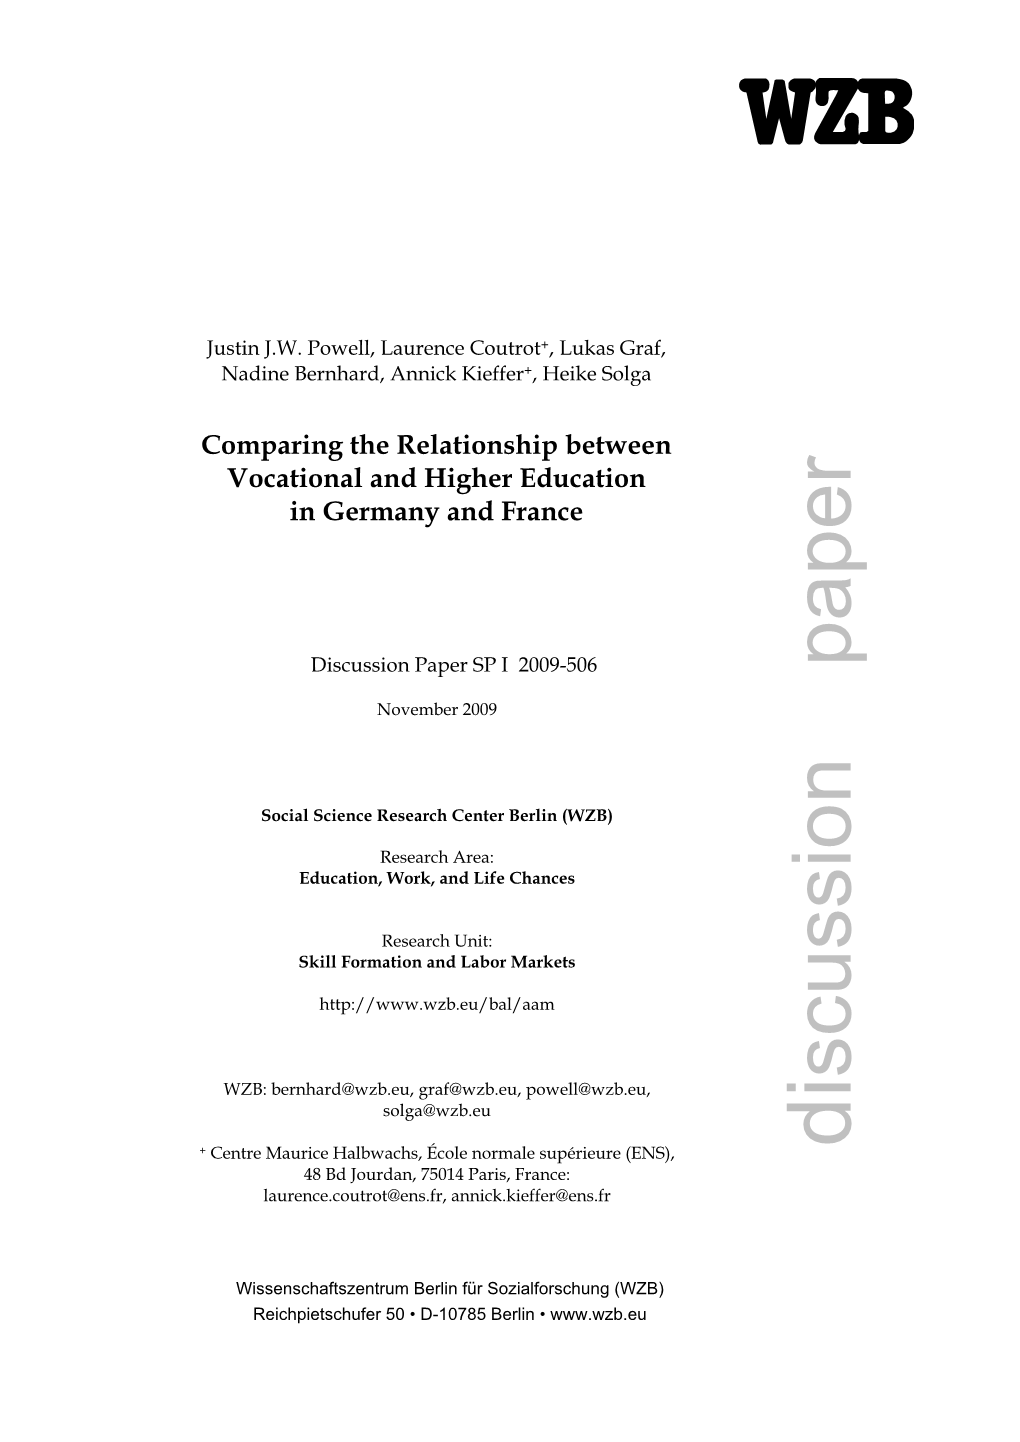 Comparing the Relationship Between Vocational and Higher Education in Germany and France